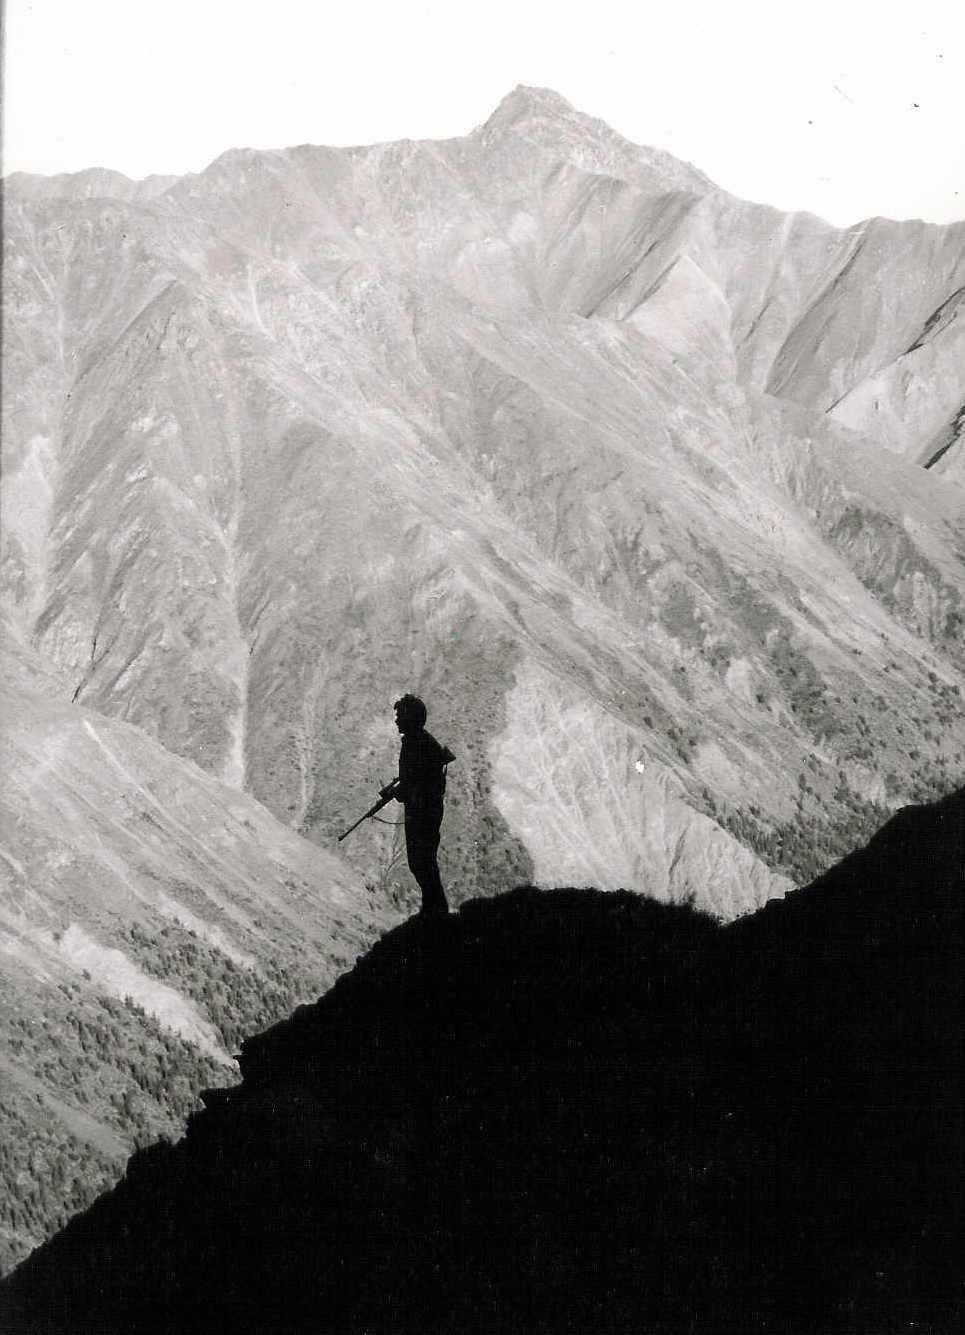 The author on an Alaska mountain 40 years ago. Image by Mike Hanback